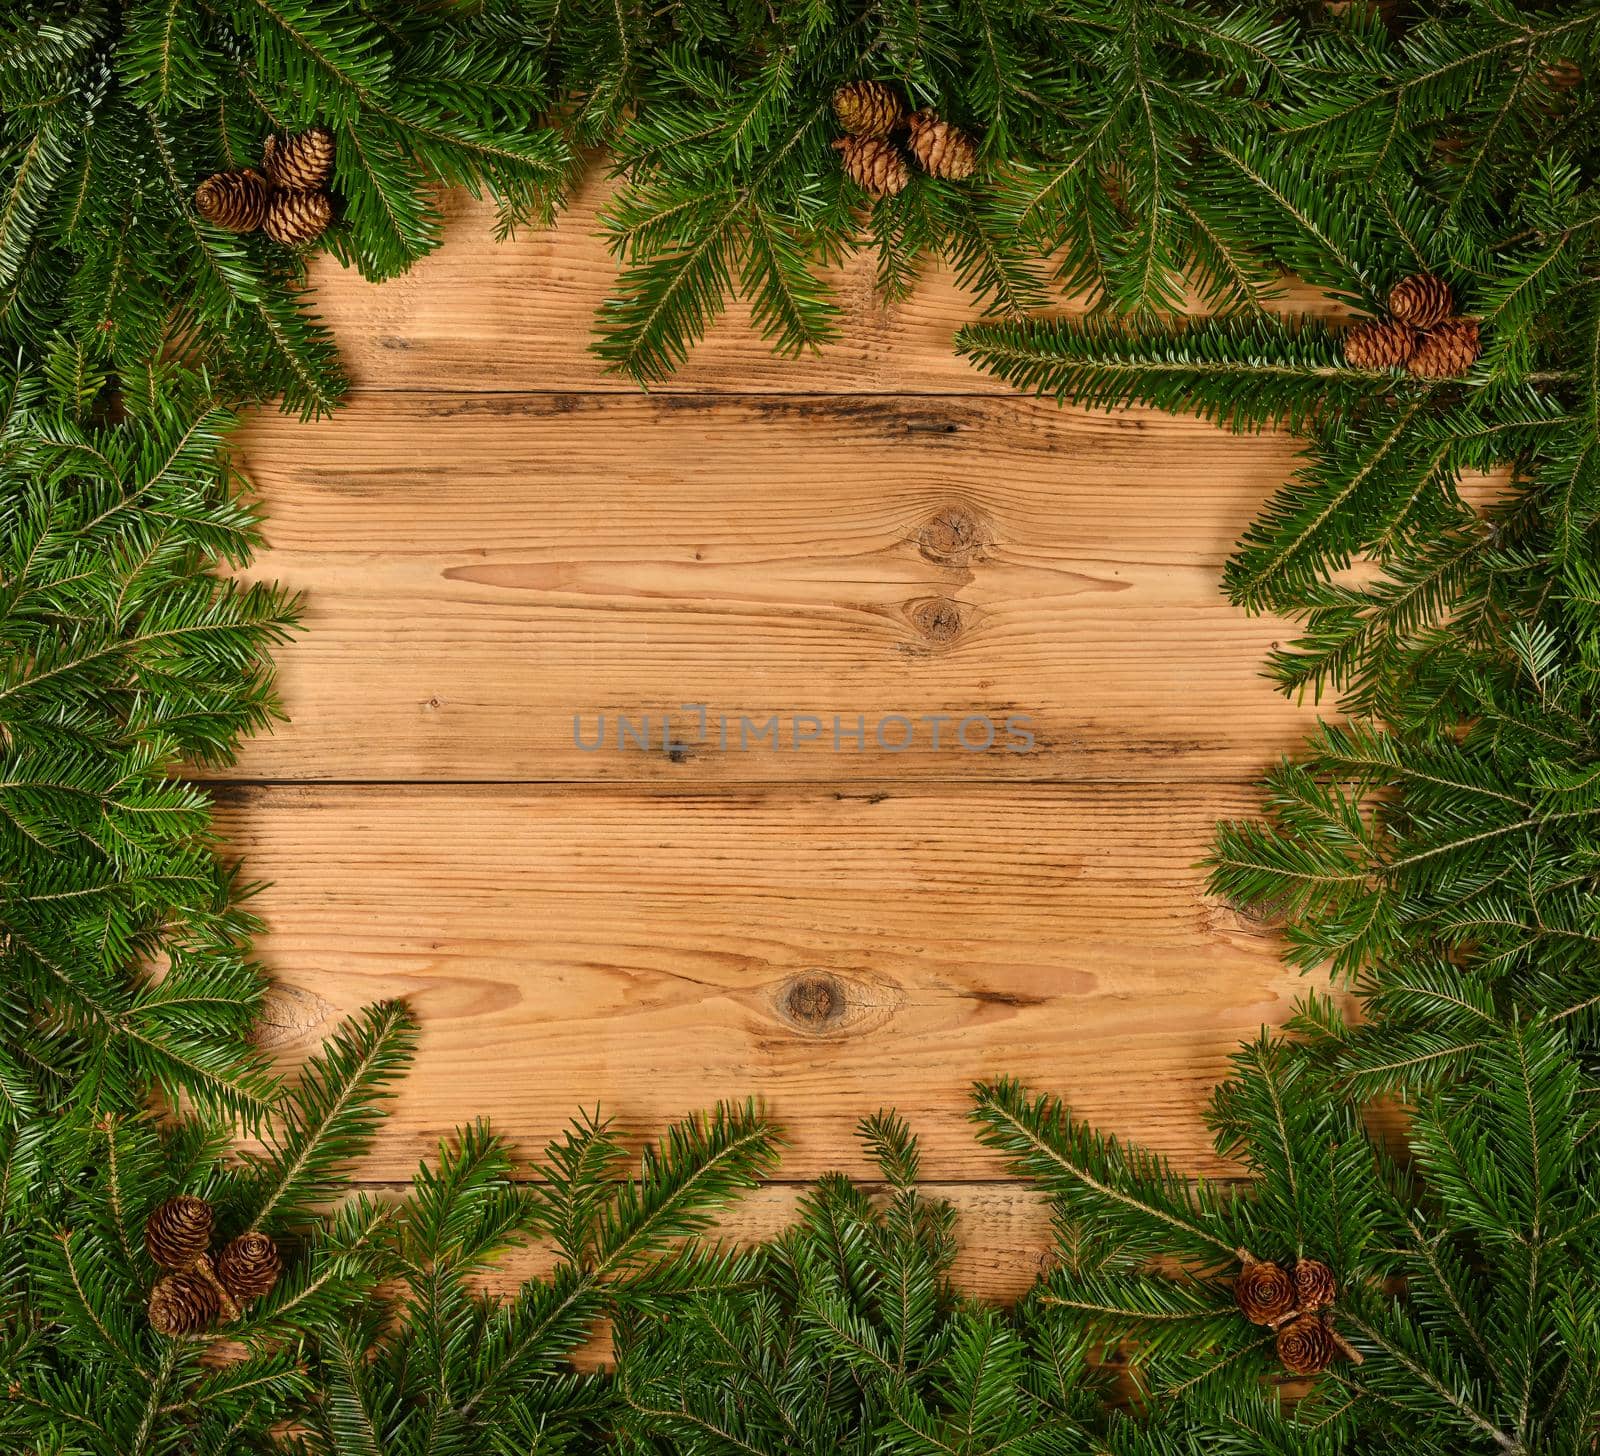 Close up border frame of fresh green spruce or pine Christmas tree branches with cones over brown wooden planks background with copy space